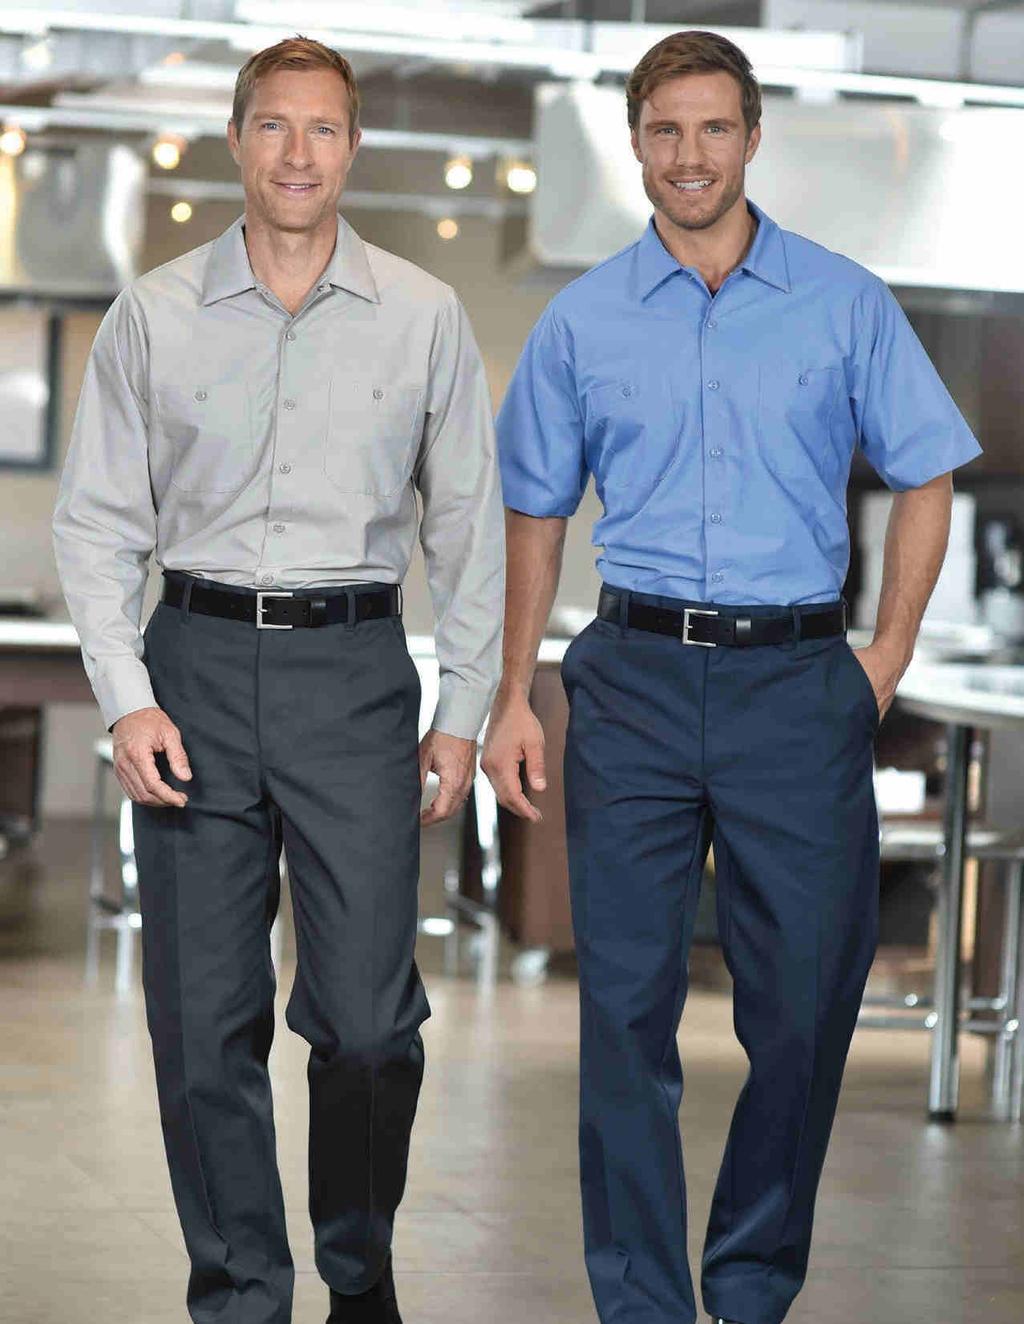 WORK SHIRTS 2350 2300 Work shirt - Poly/Cotton Perfect for a wide range of industries and work conditions.